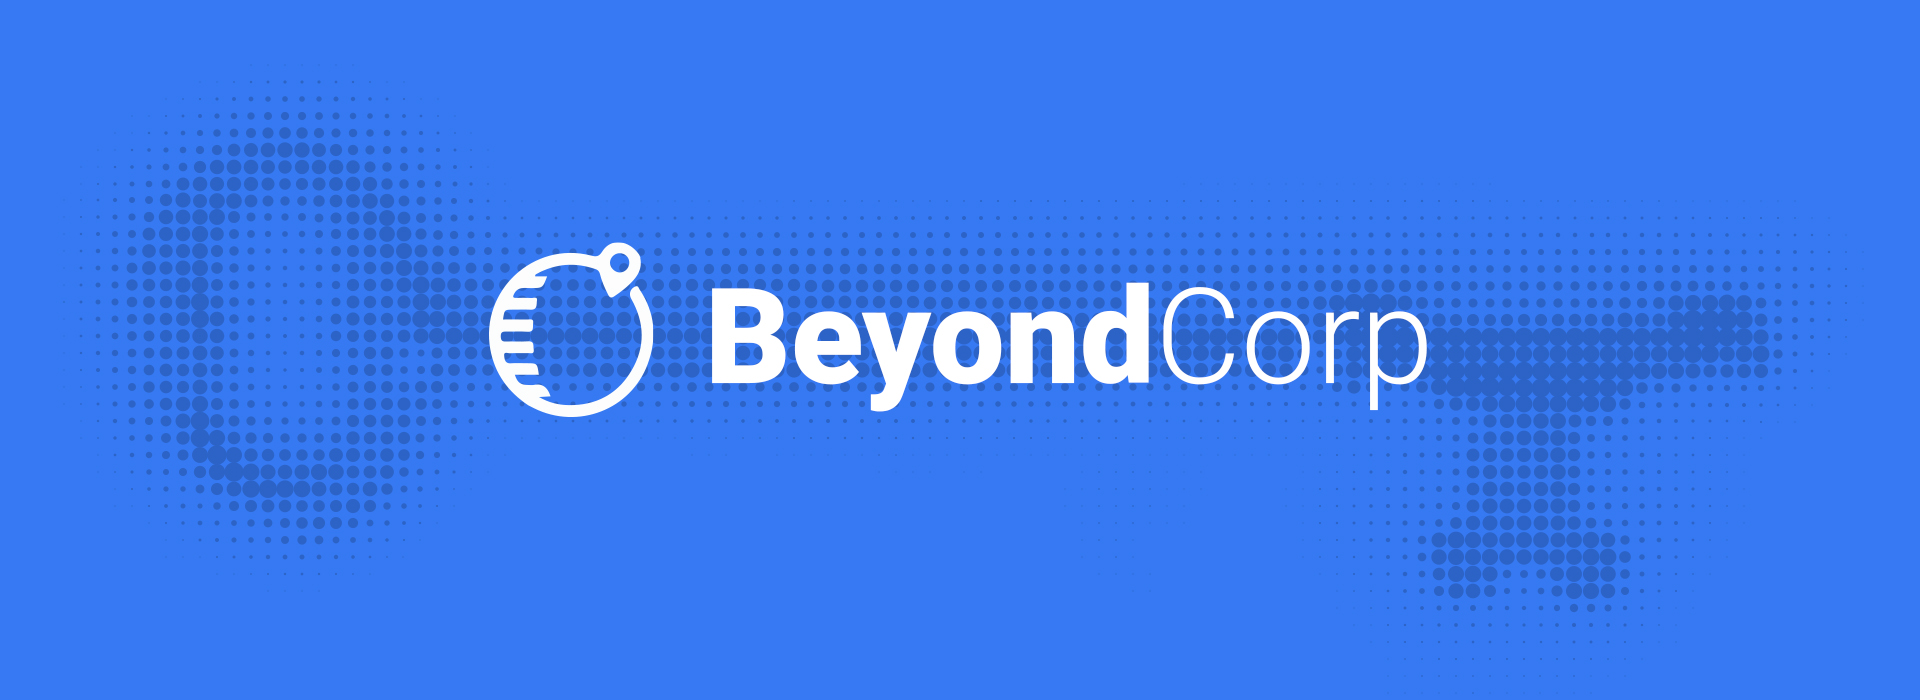 beyondcorp open source access manager